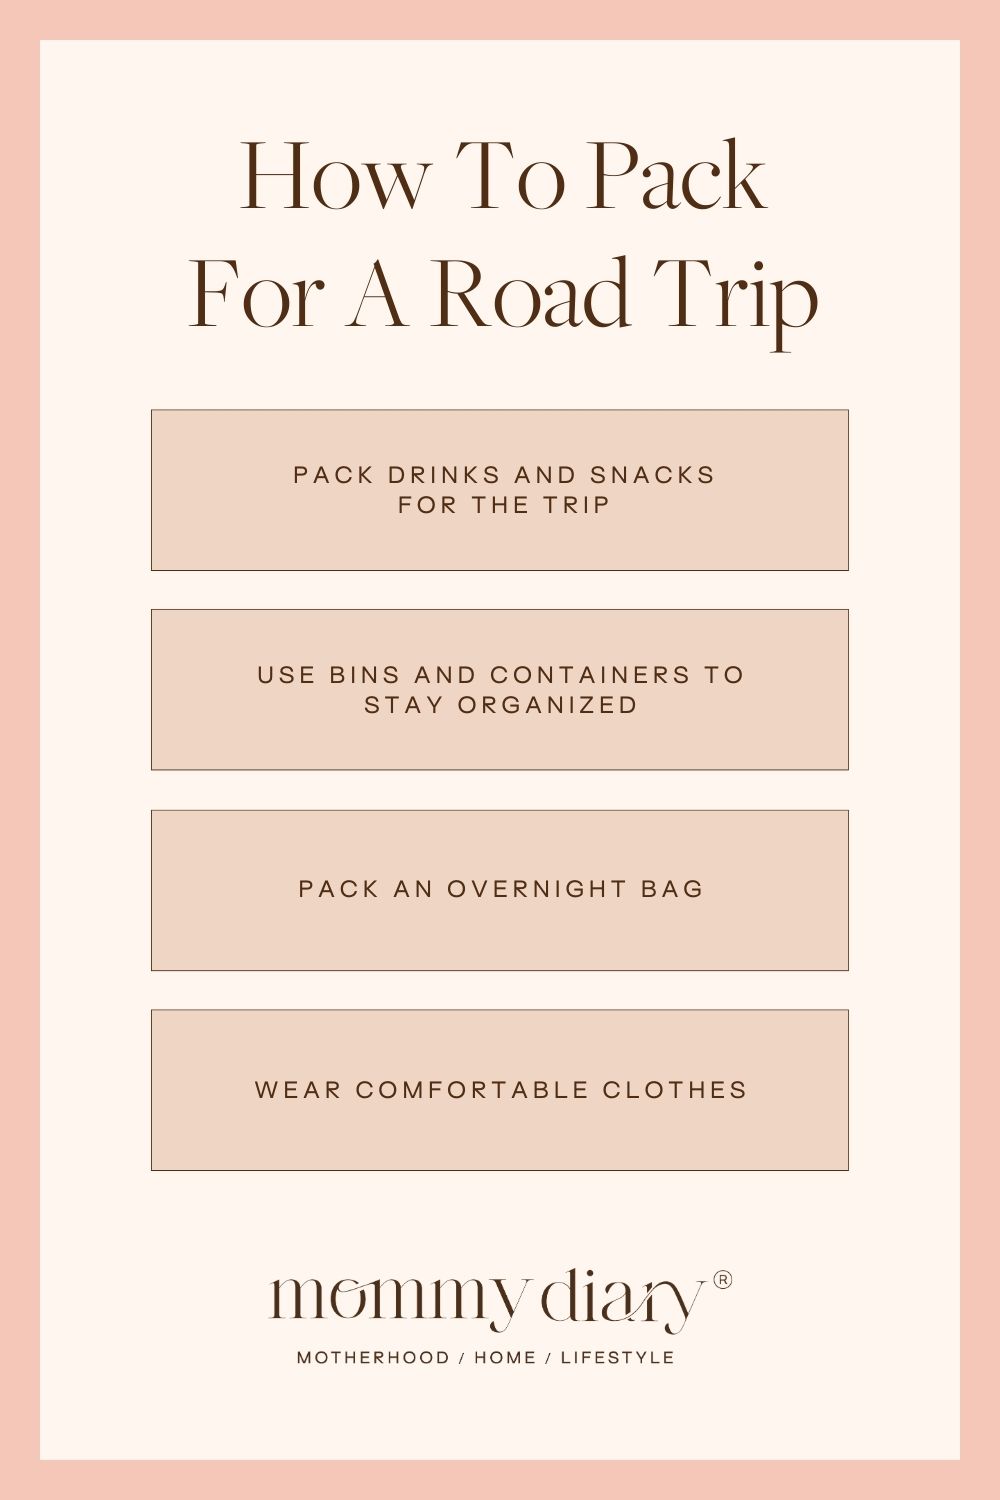 How To Pack For A Road Trip